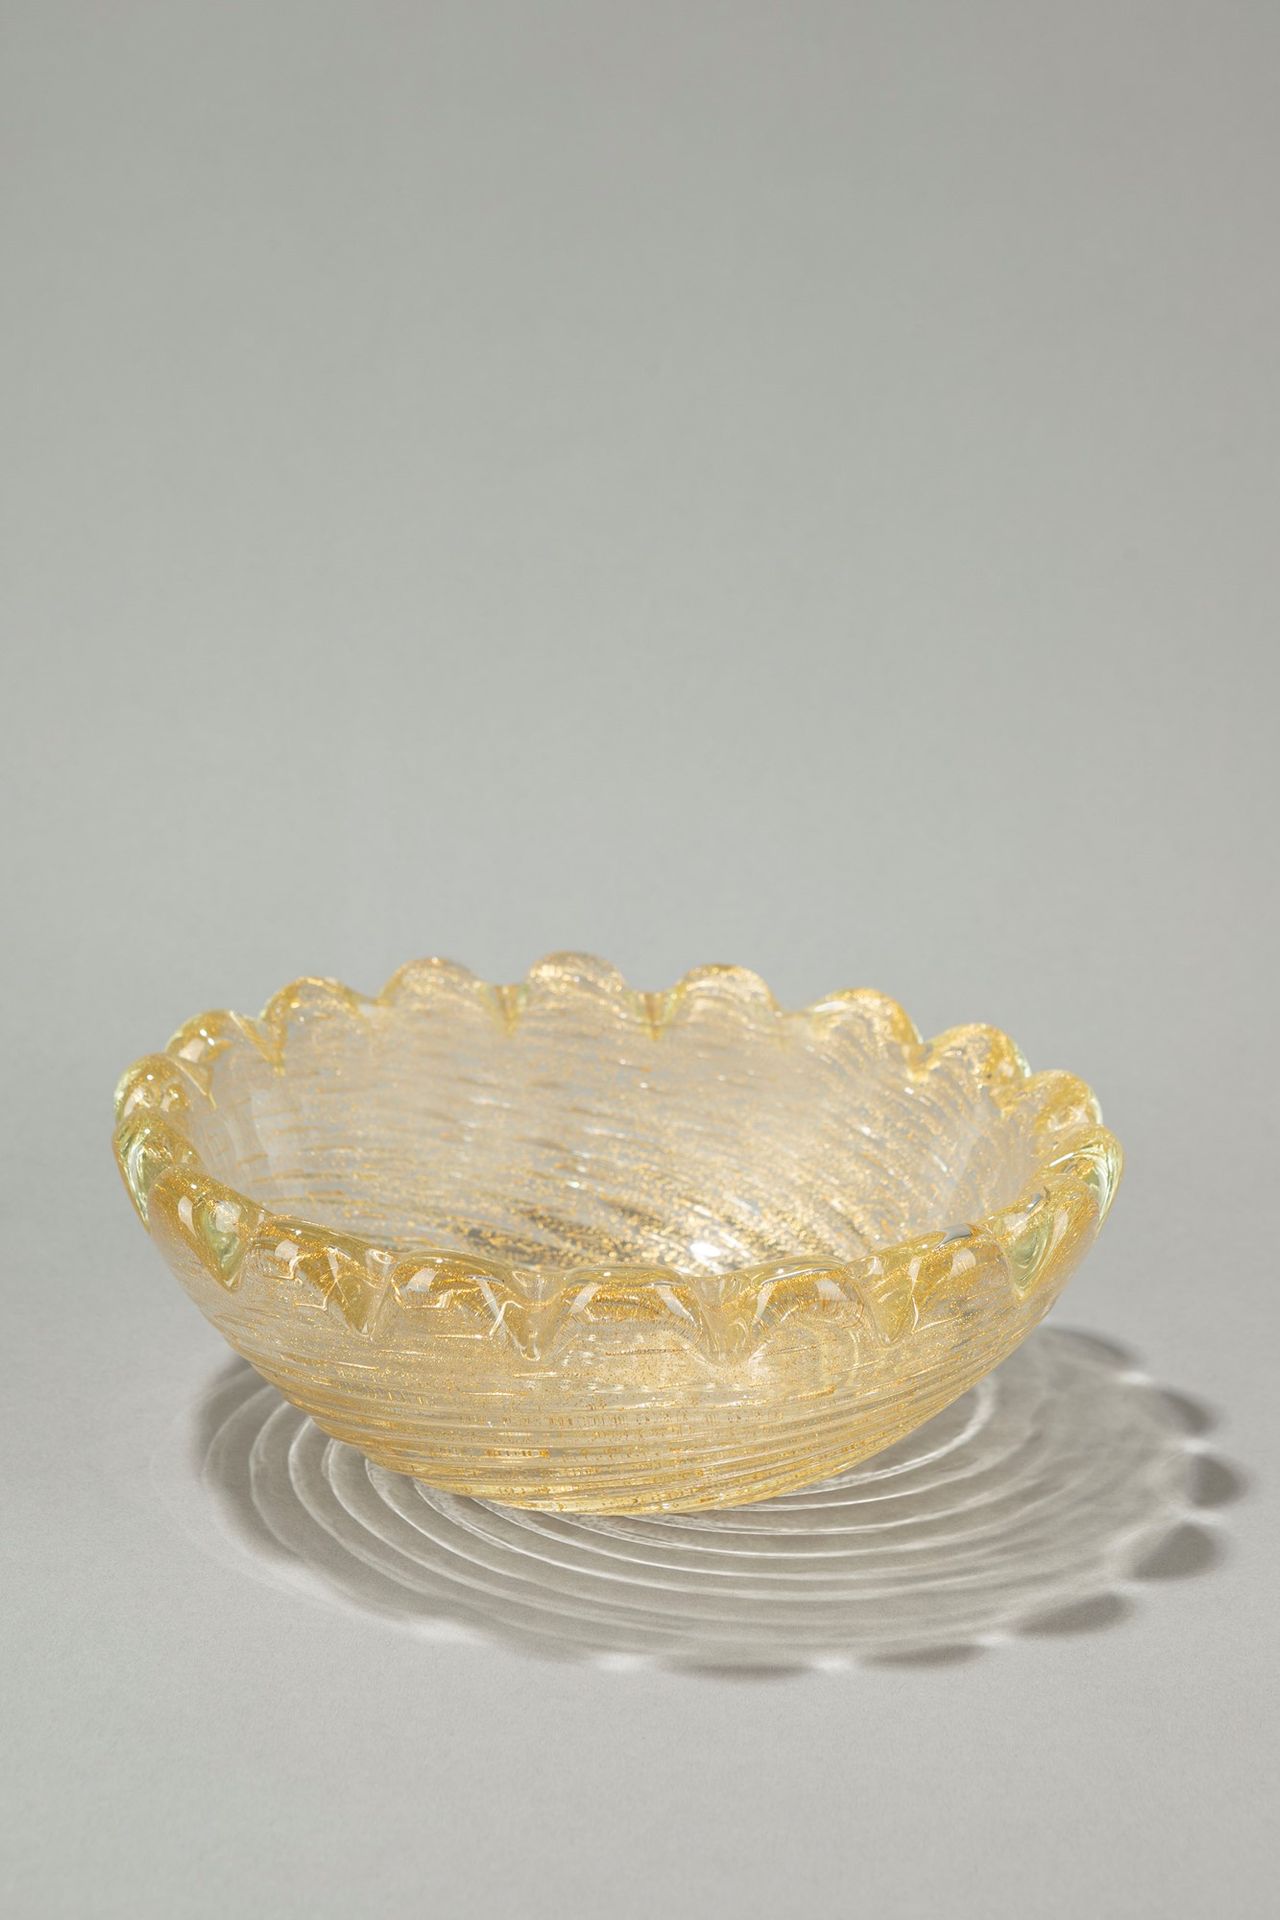 SEGUSO Bowl, 1950 ca.

H 9 x diam 25 cm
glass with golden inserts